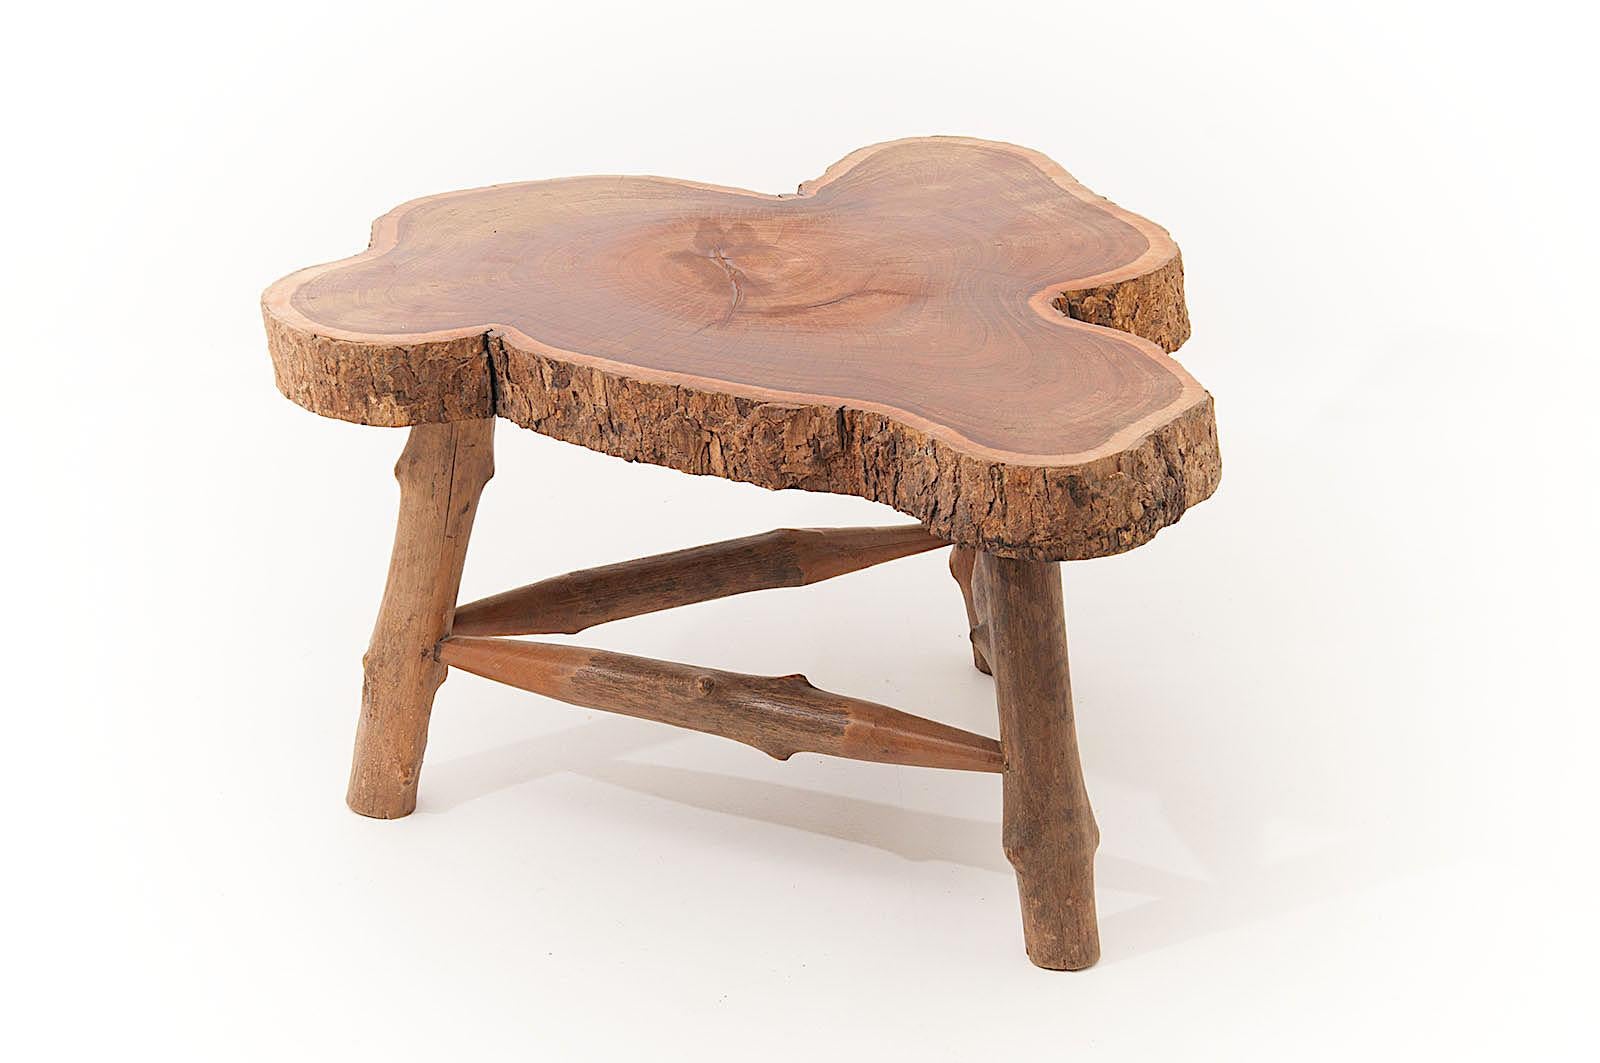 French Wood Organic Coffee Table, 1950, France, Brown Color, Polishes Oil Finished